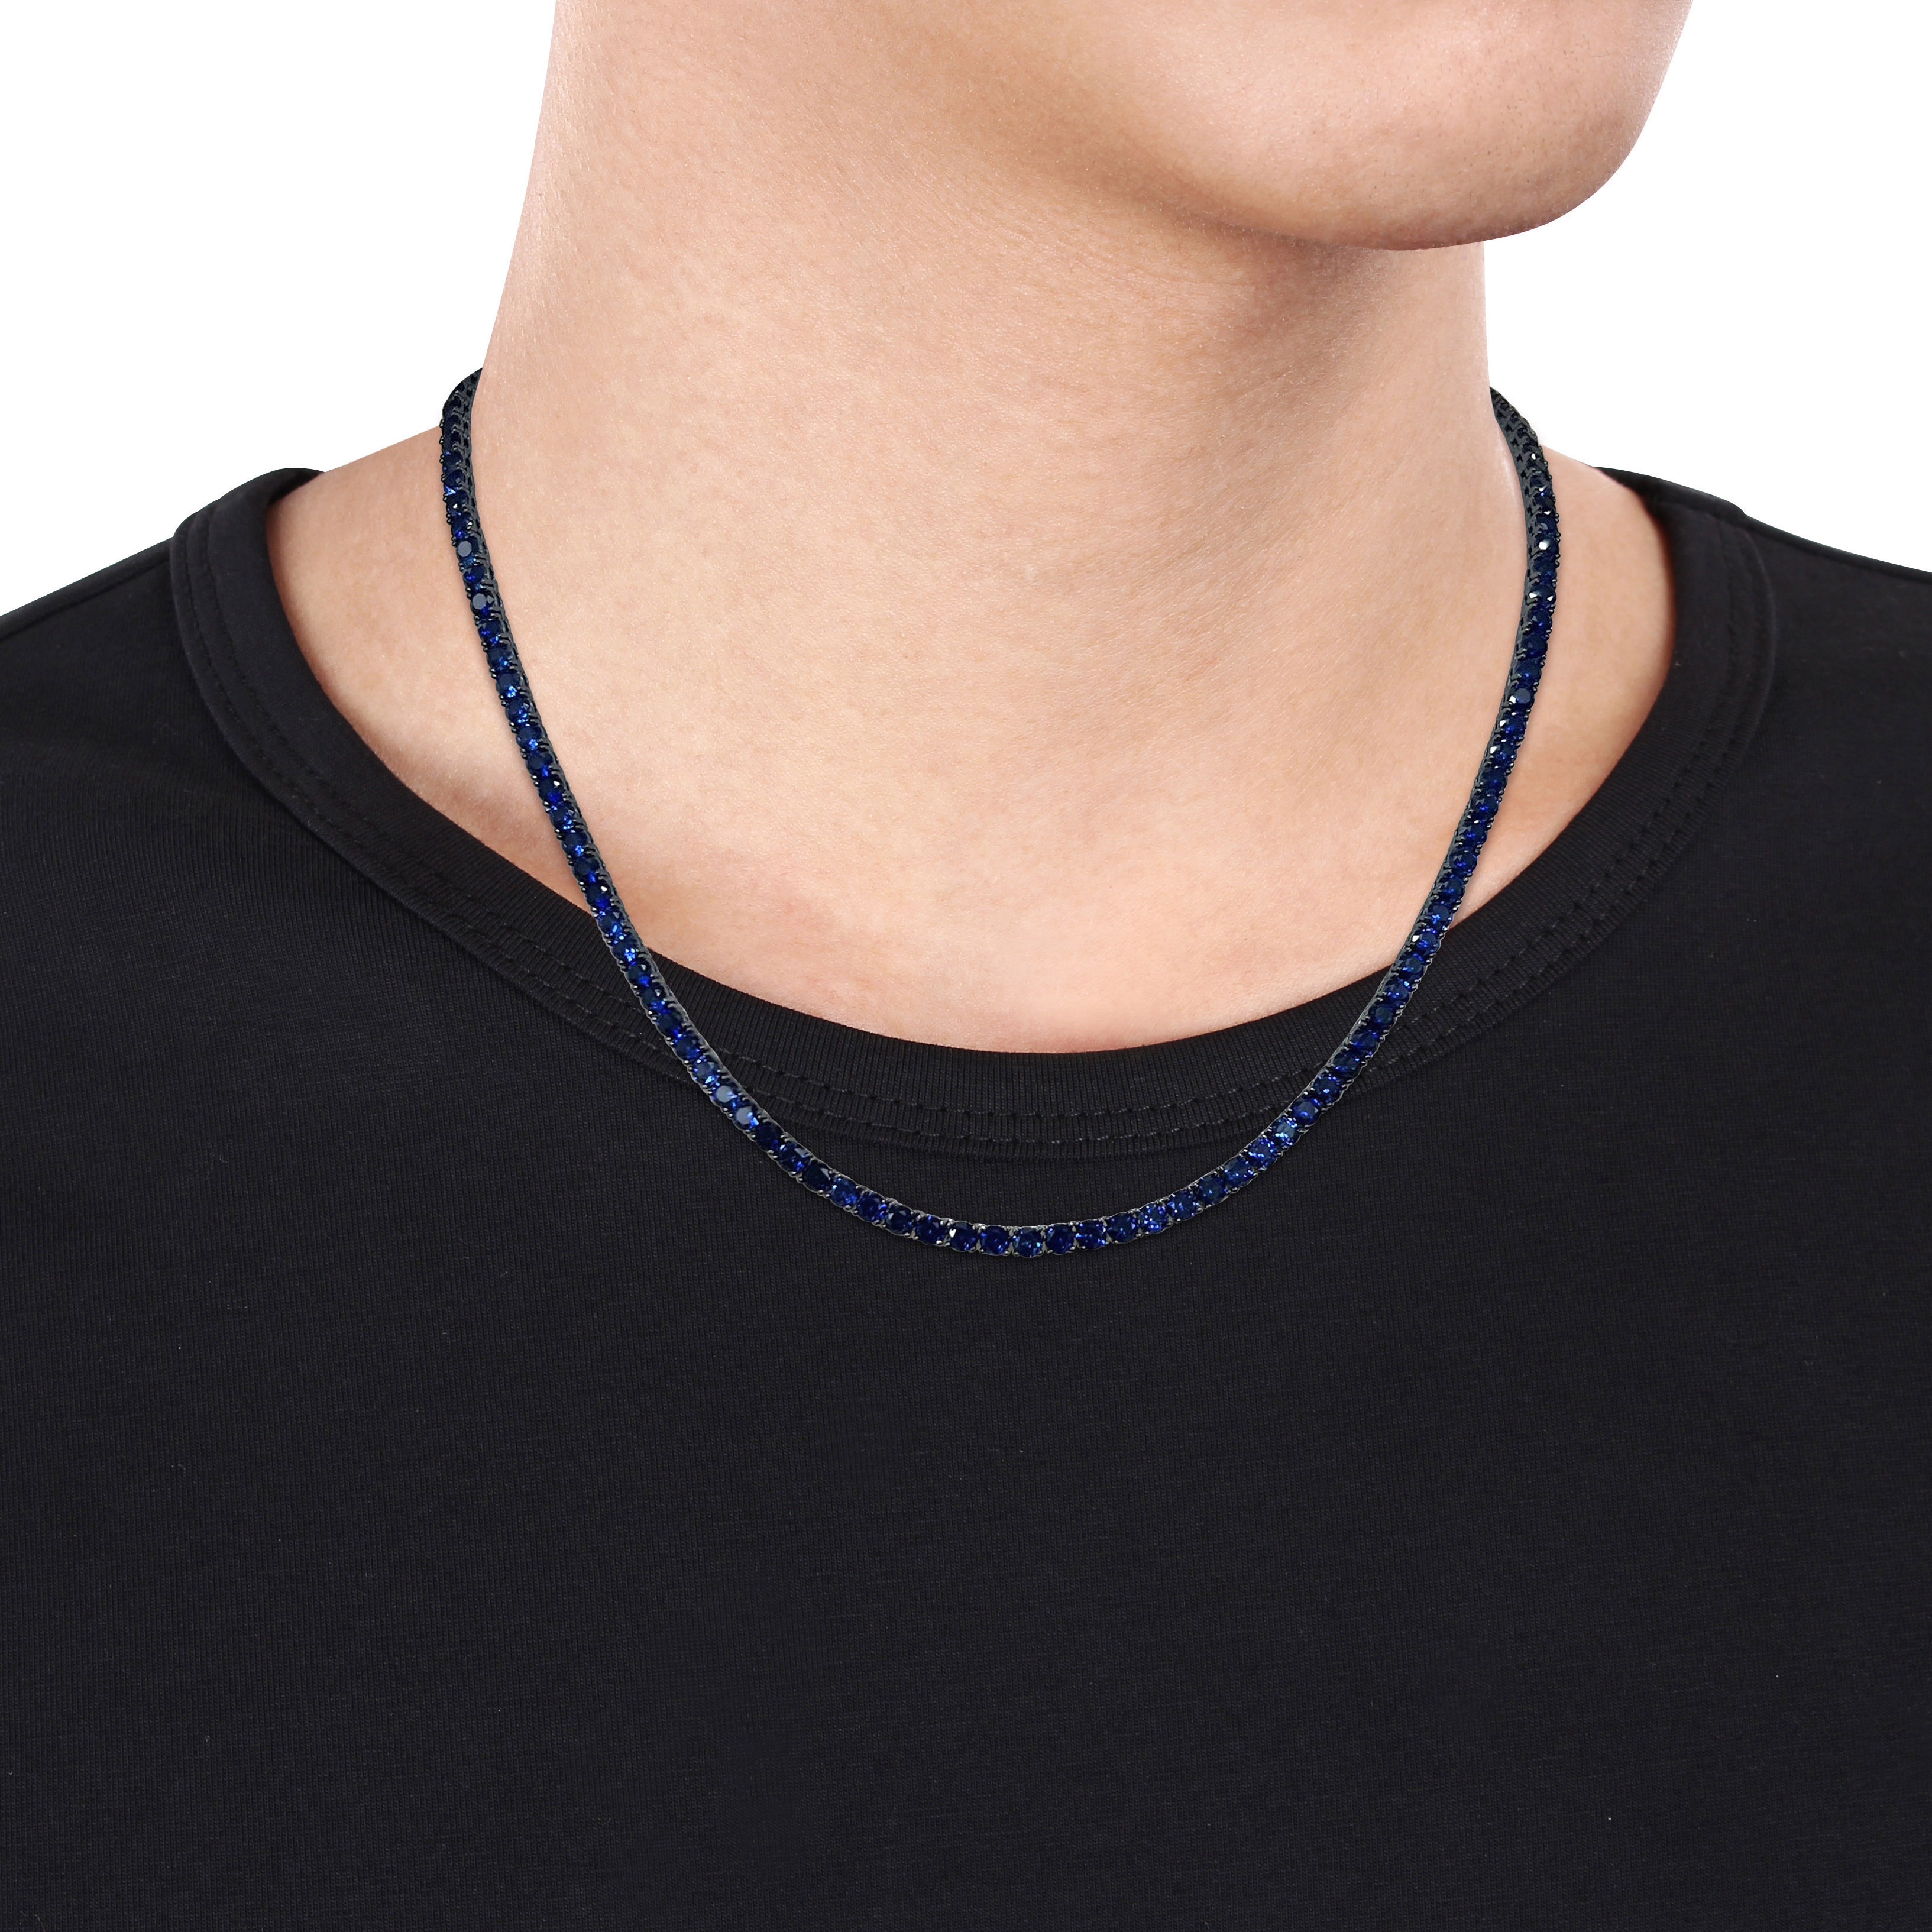 40 1/4 CT TGW Created Blue Sapphire Men's Tennis Necklace in Black Rhodium Plated Sterling Silver - 20 in